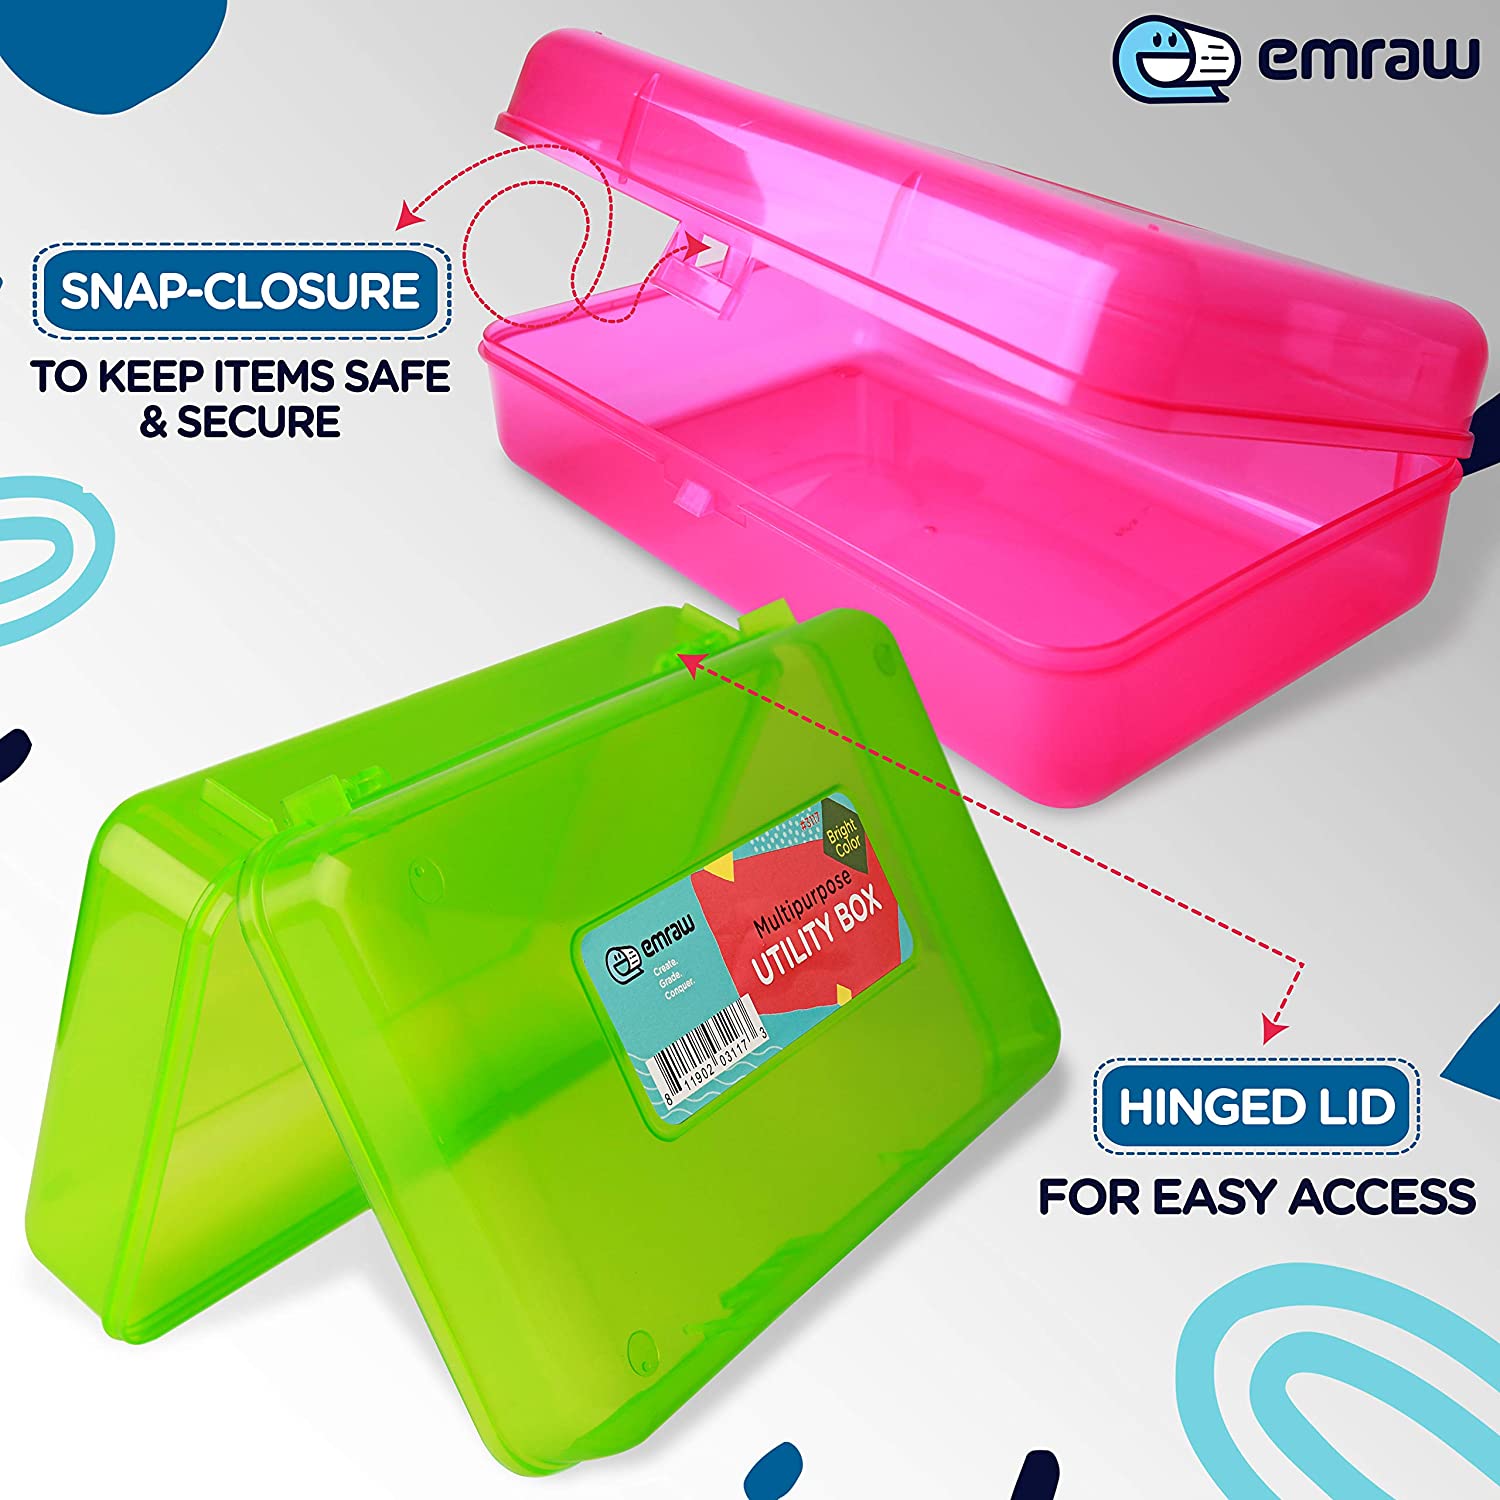 Emraw Multipurpose Utility Box Large Assorted Colors, Pack of 2 (New)